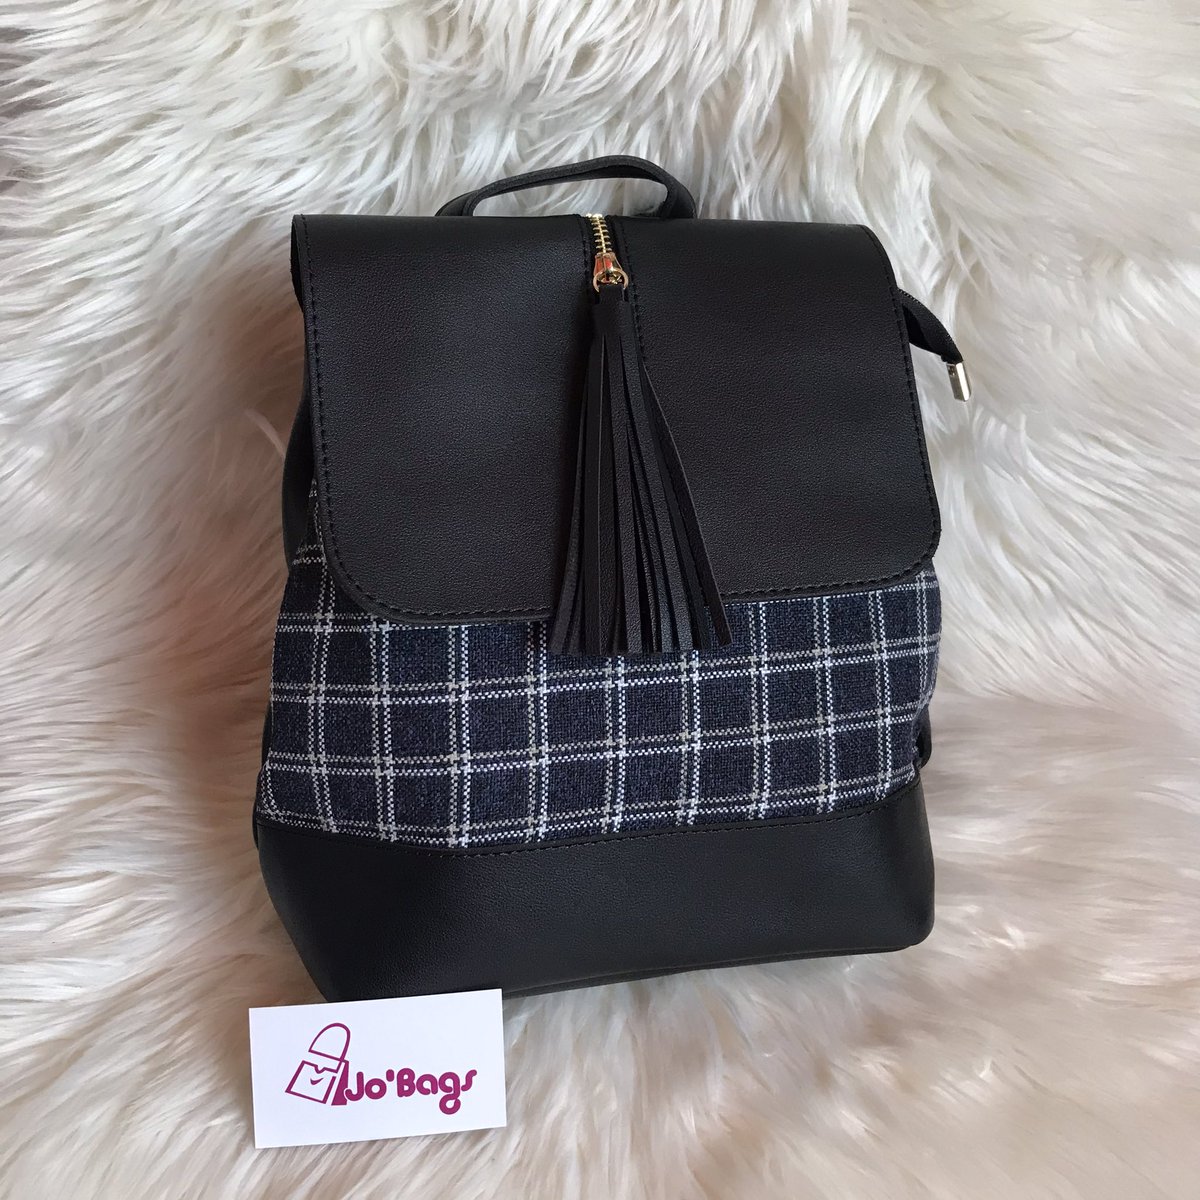 Black Backpack/crossbag is available at 60,000 shs only! Call/WhatsApp 0781508395 for delivery. 
#christmasshopping #secretsantagift